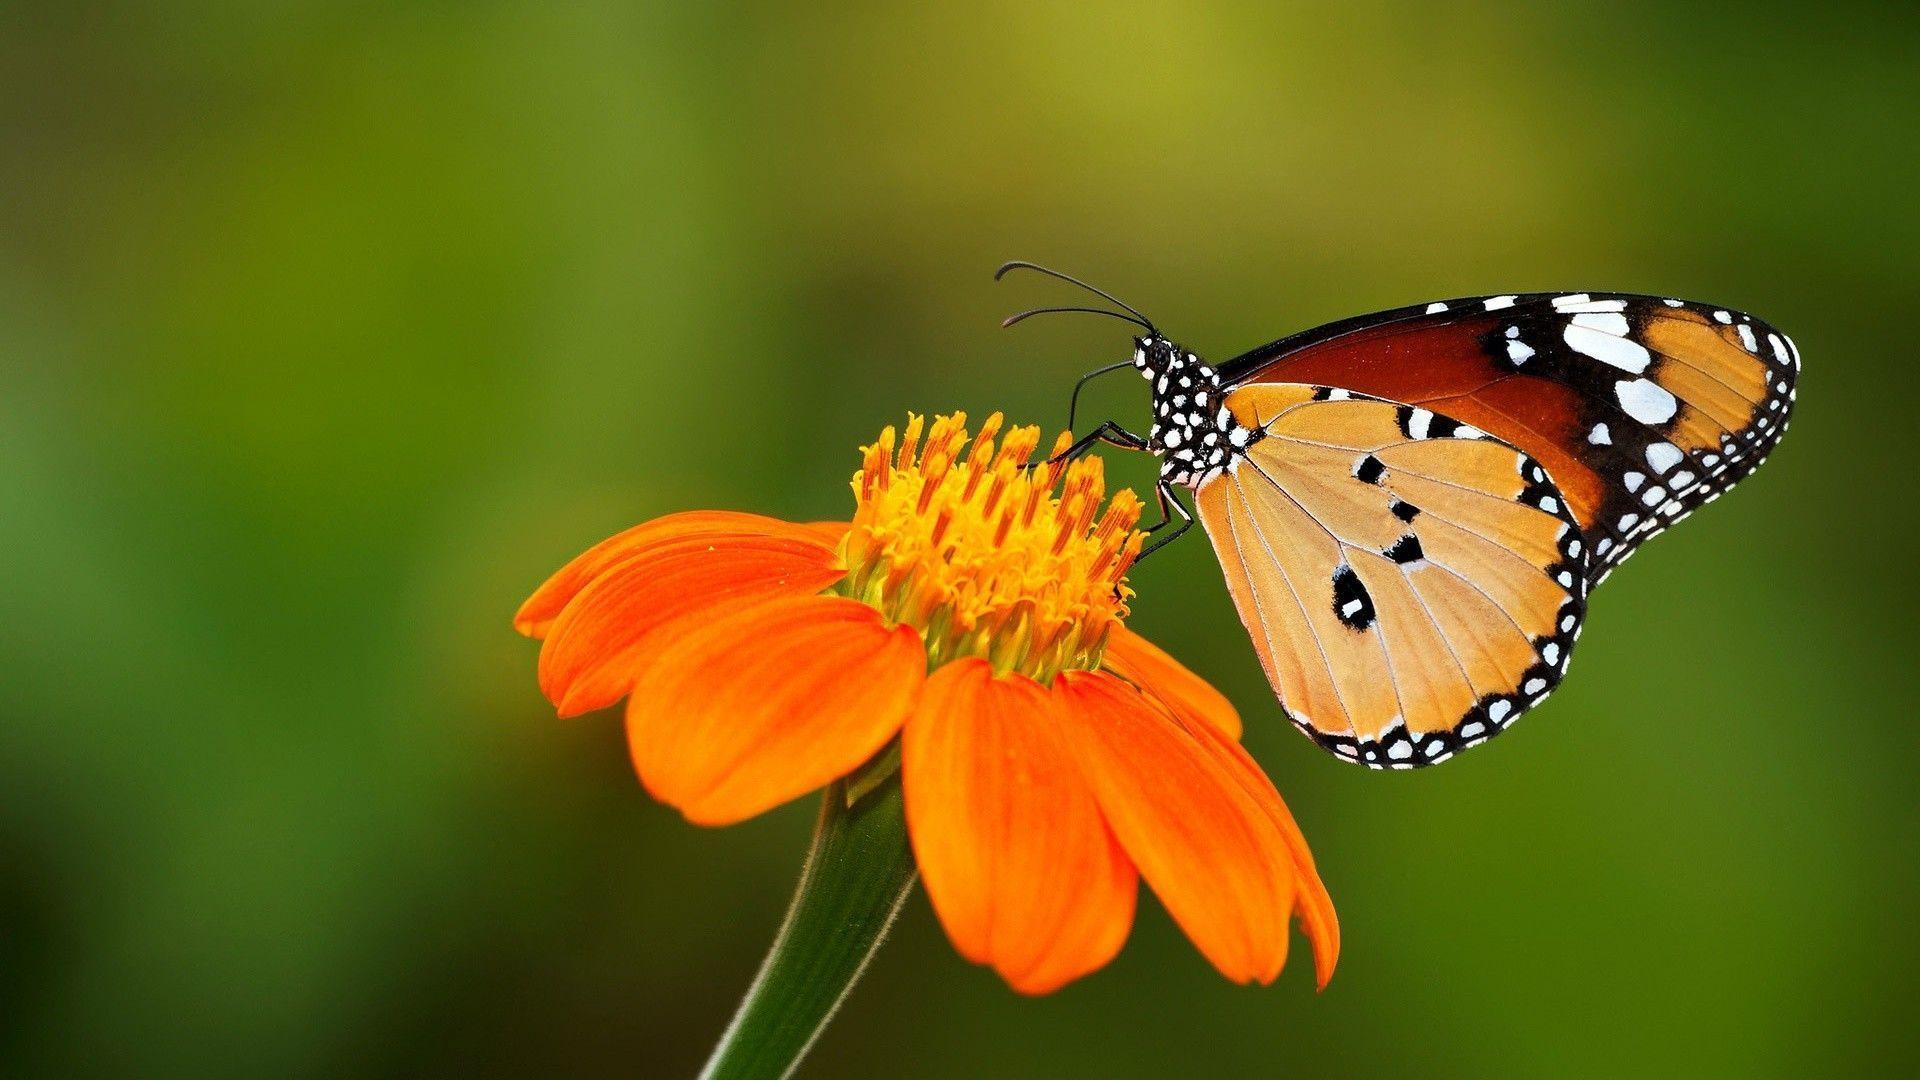 Awesome Butterfly And Flower Wallpaper HD